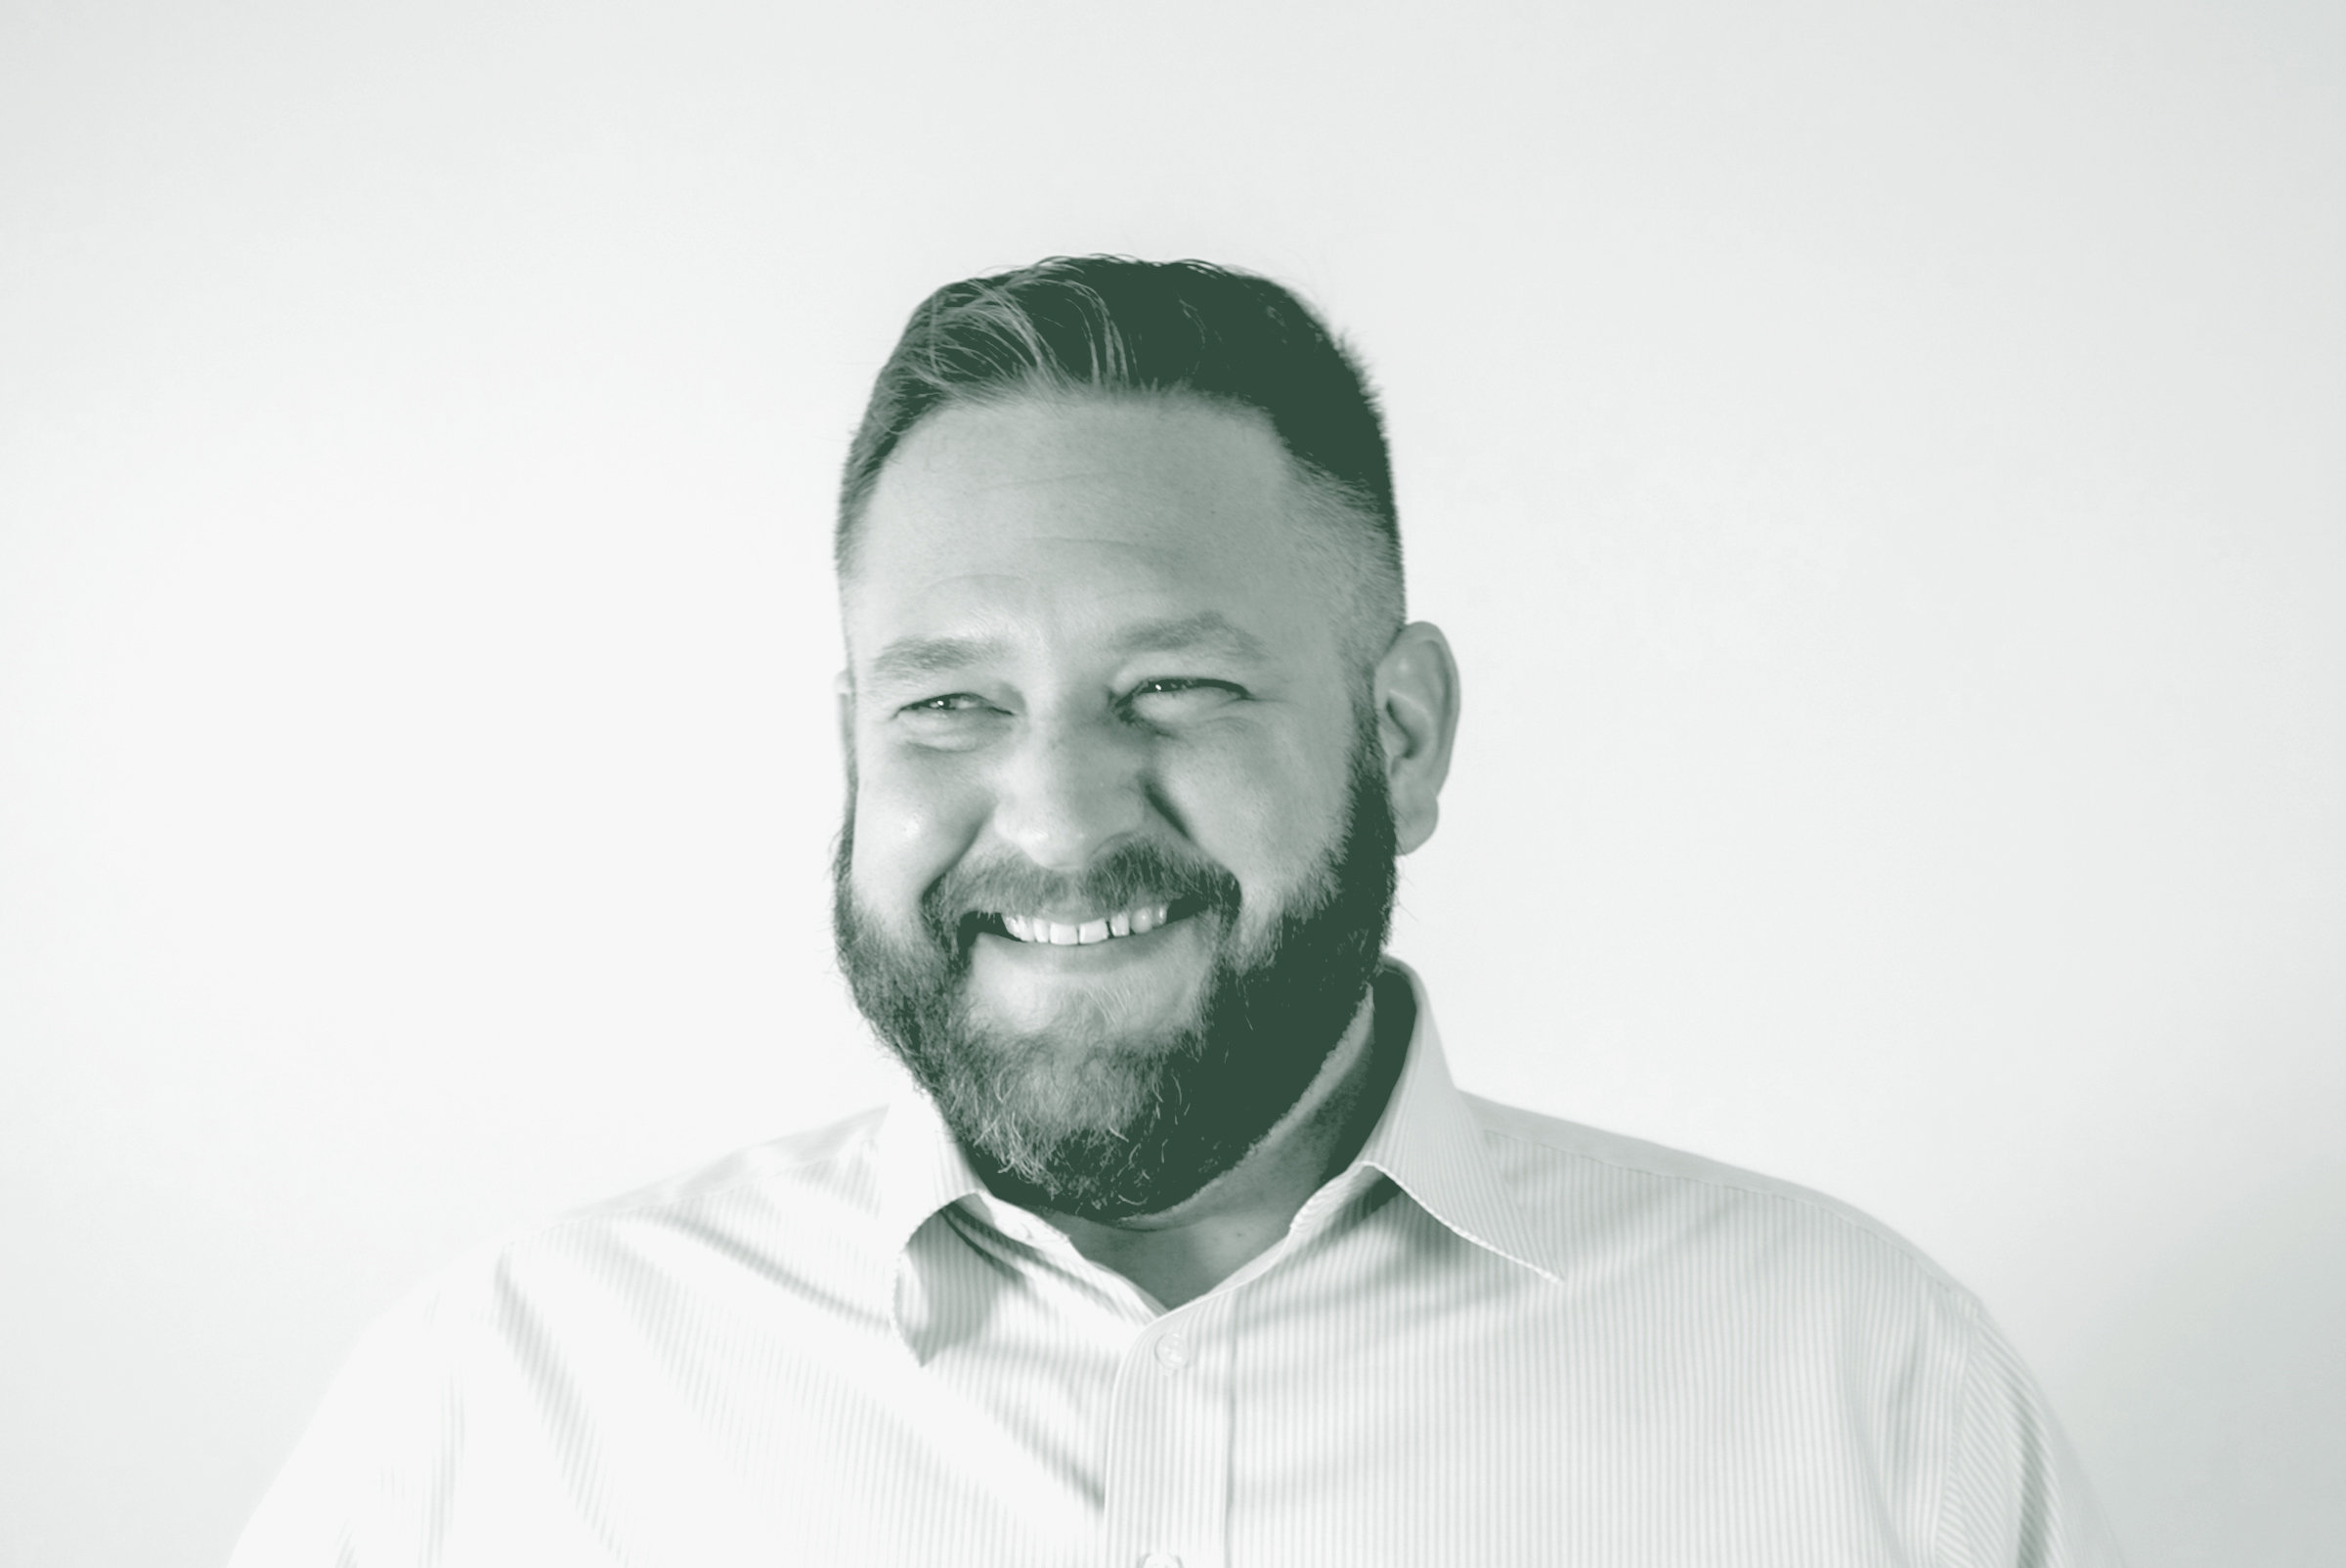 A black and white portrait of Scott Williams, a Senior Project Coordinator with GFF in the Faith & Community Studio, in front of a white background.